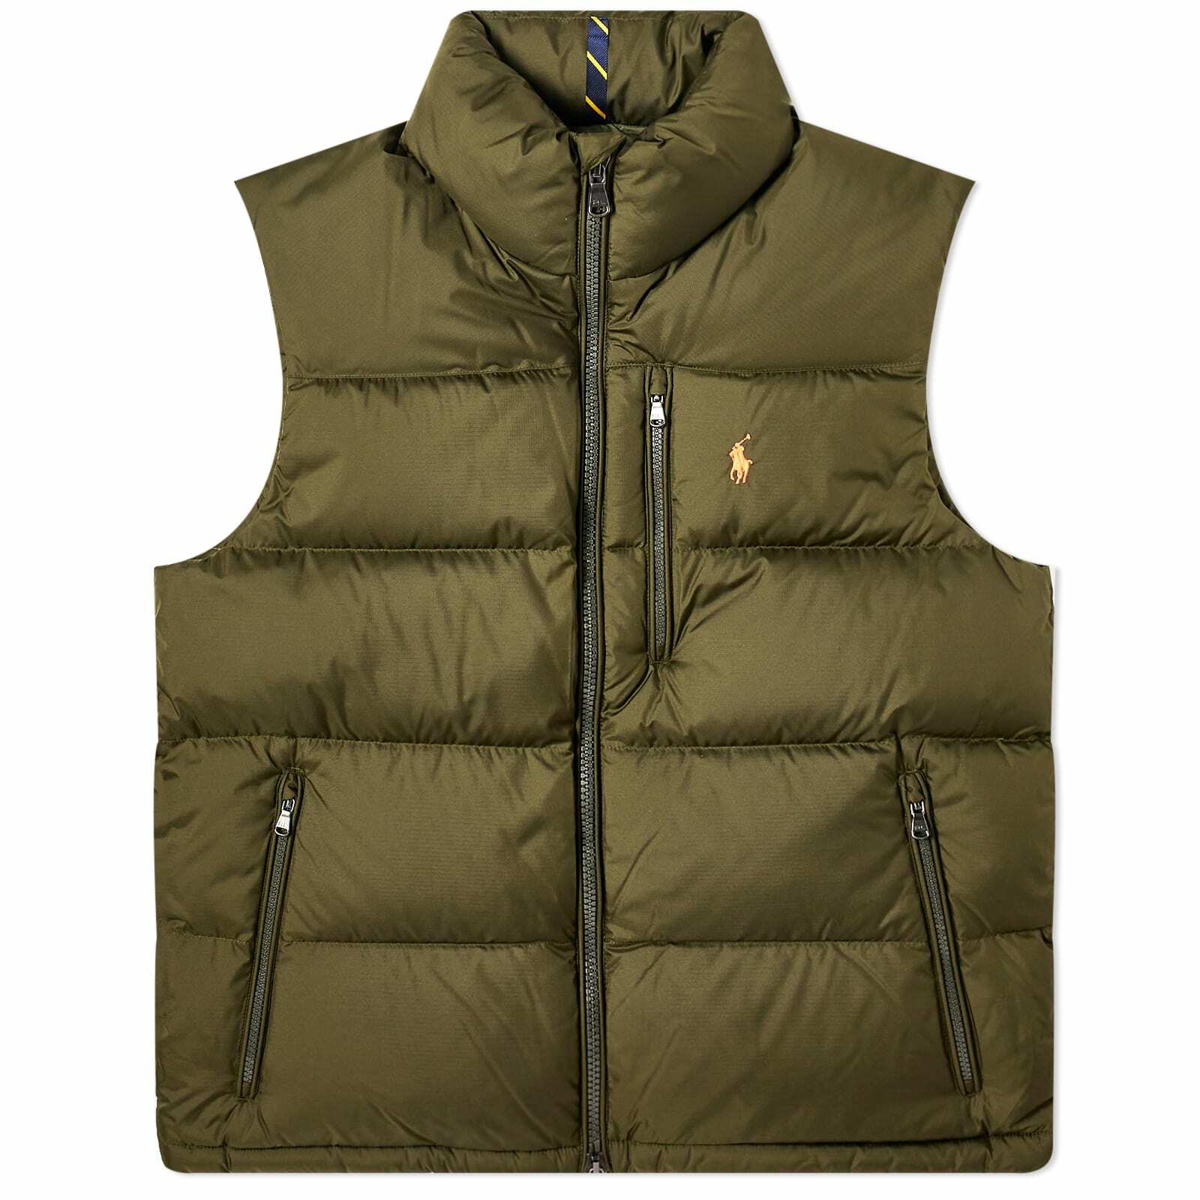 Buy Ralph Lauren Hybrid Sweater Vest - Army Olive Heather At 48